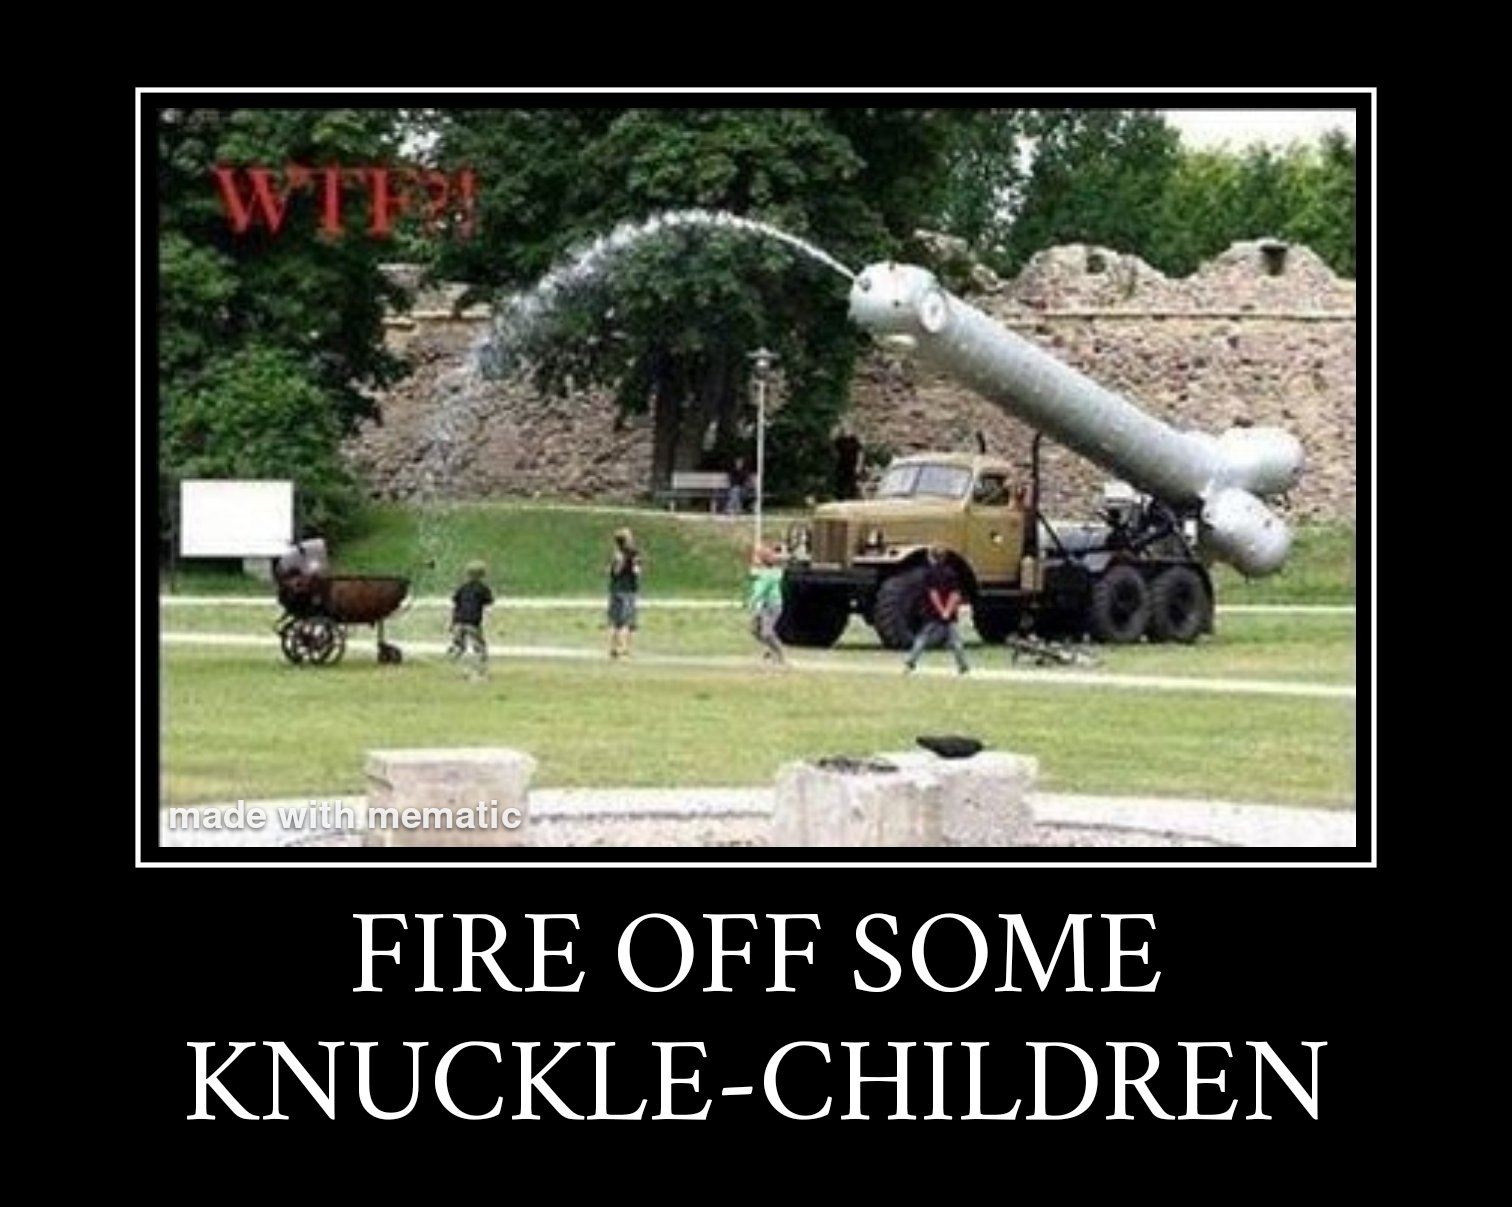 Fire off some knuckle children